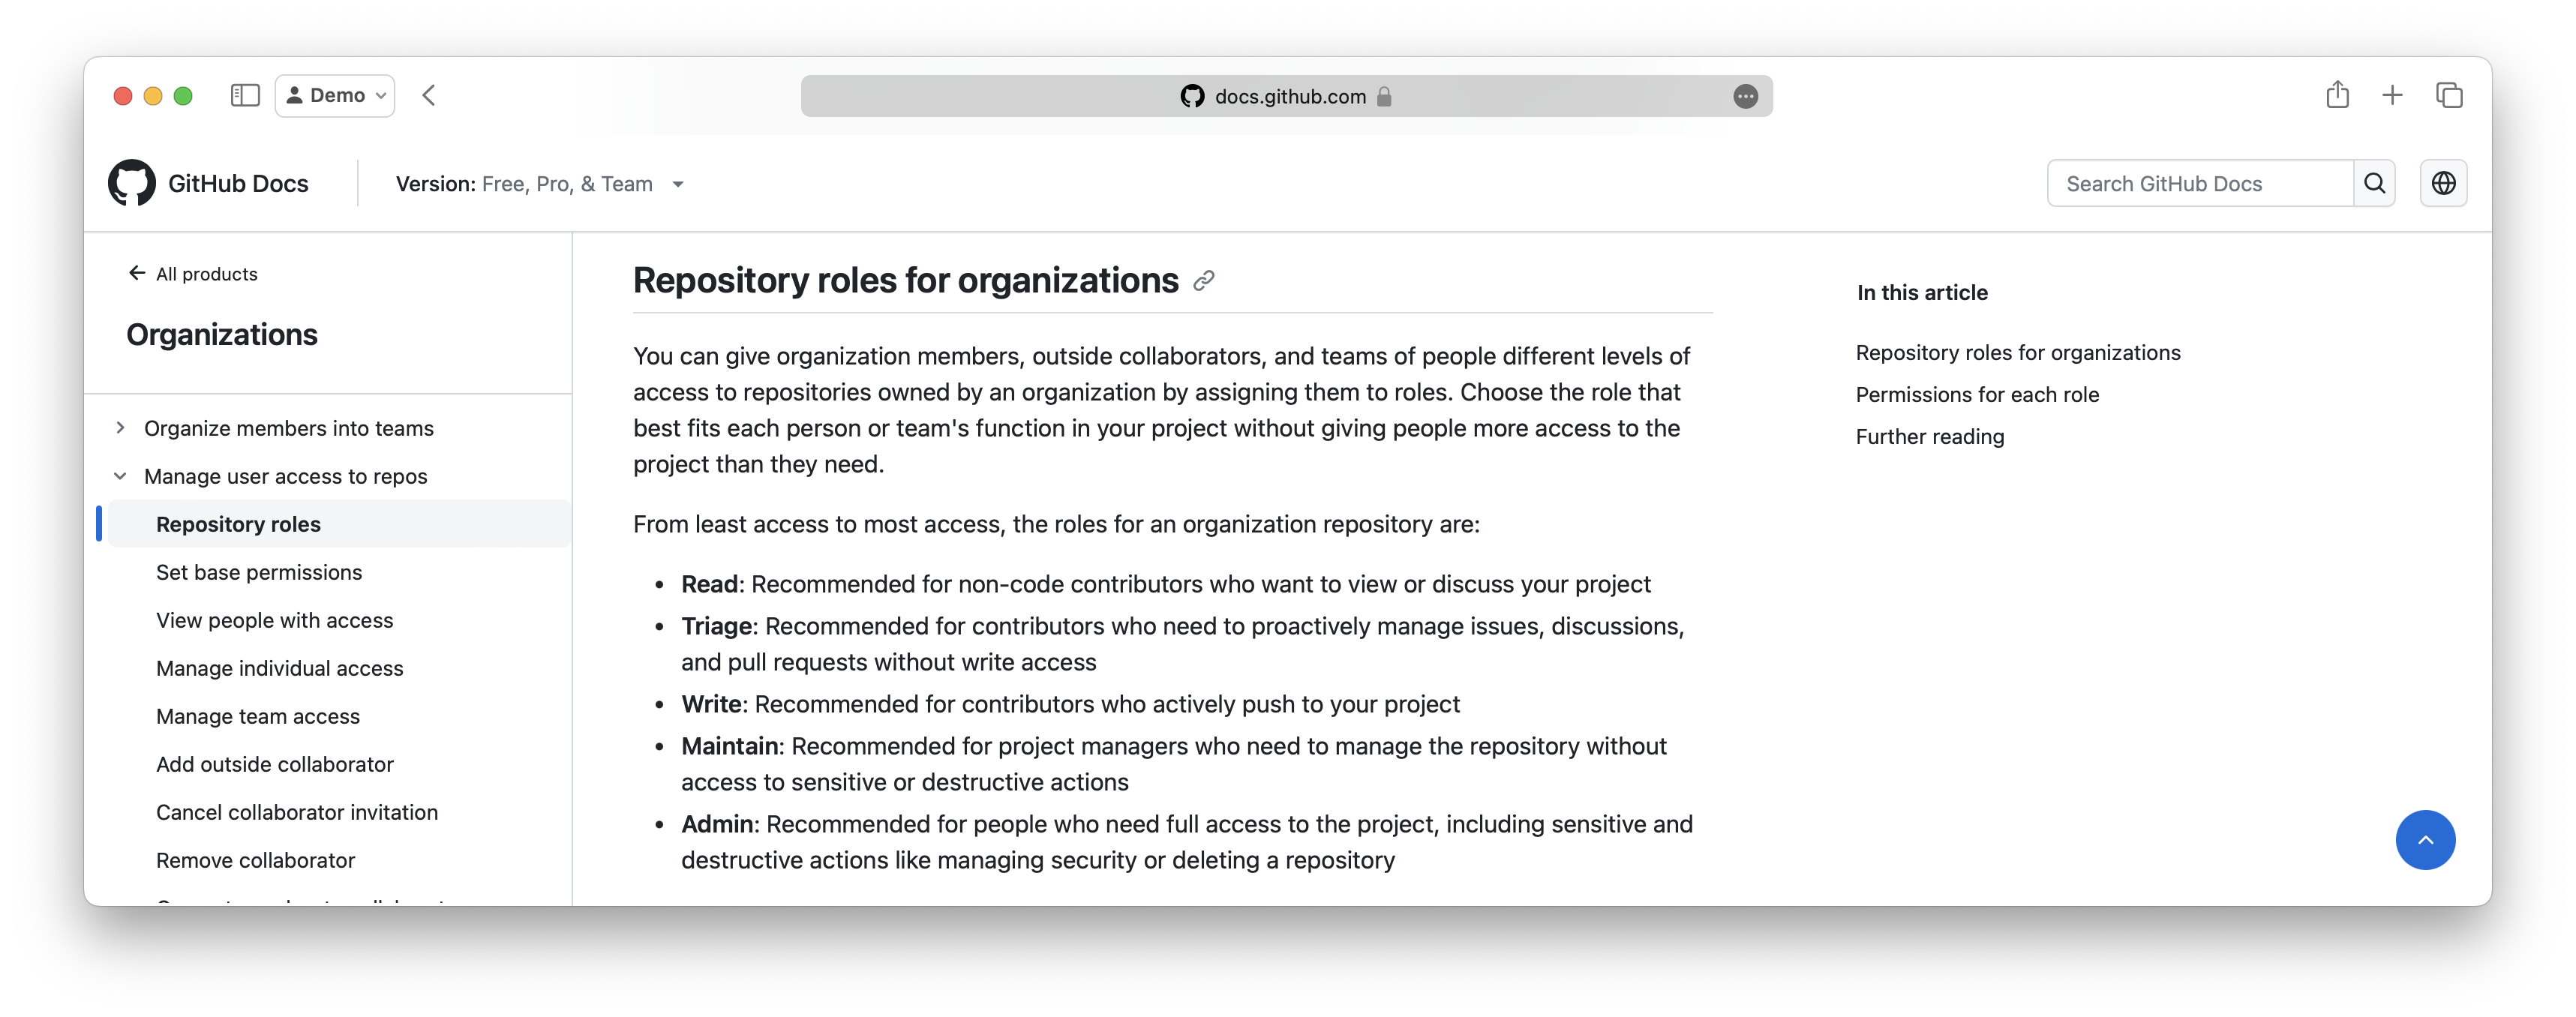 Screenshot of the GitHub Documentation showing available roles